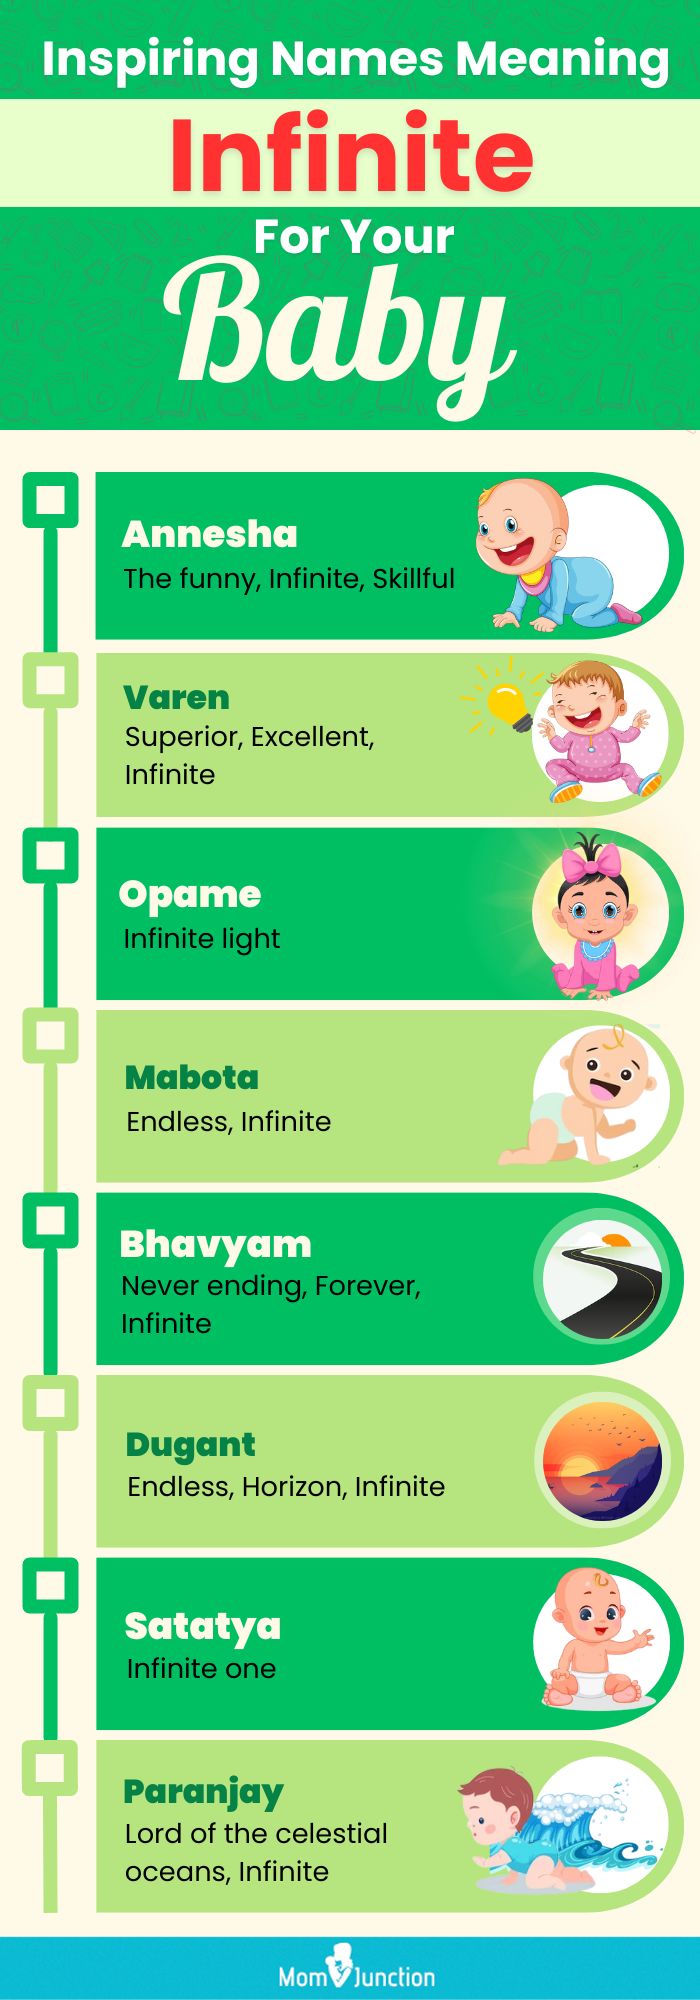 inspiring names meaning infinite for your baby (infographic)